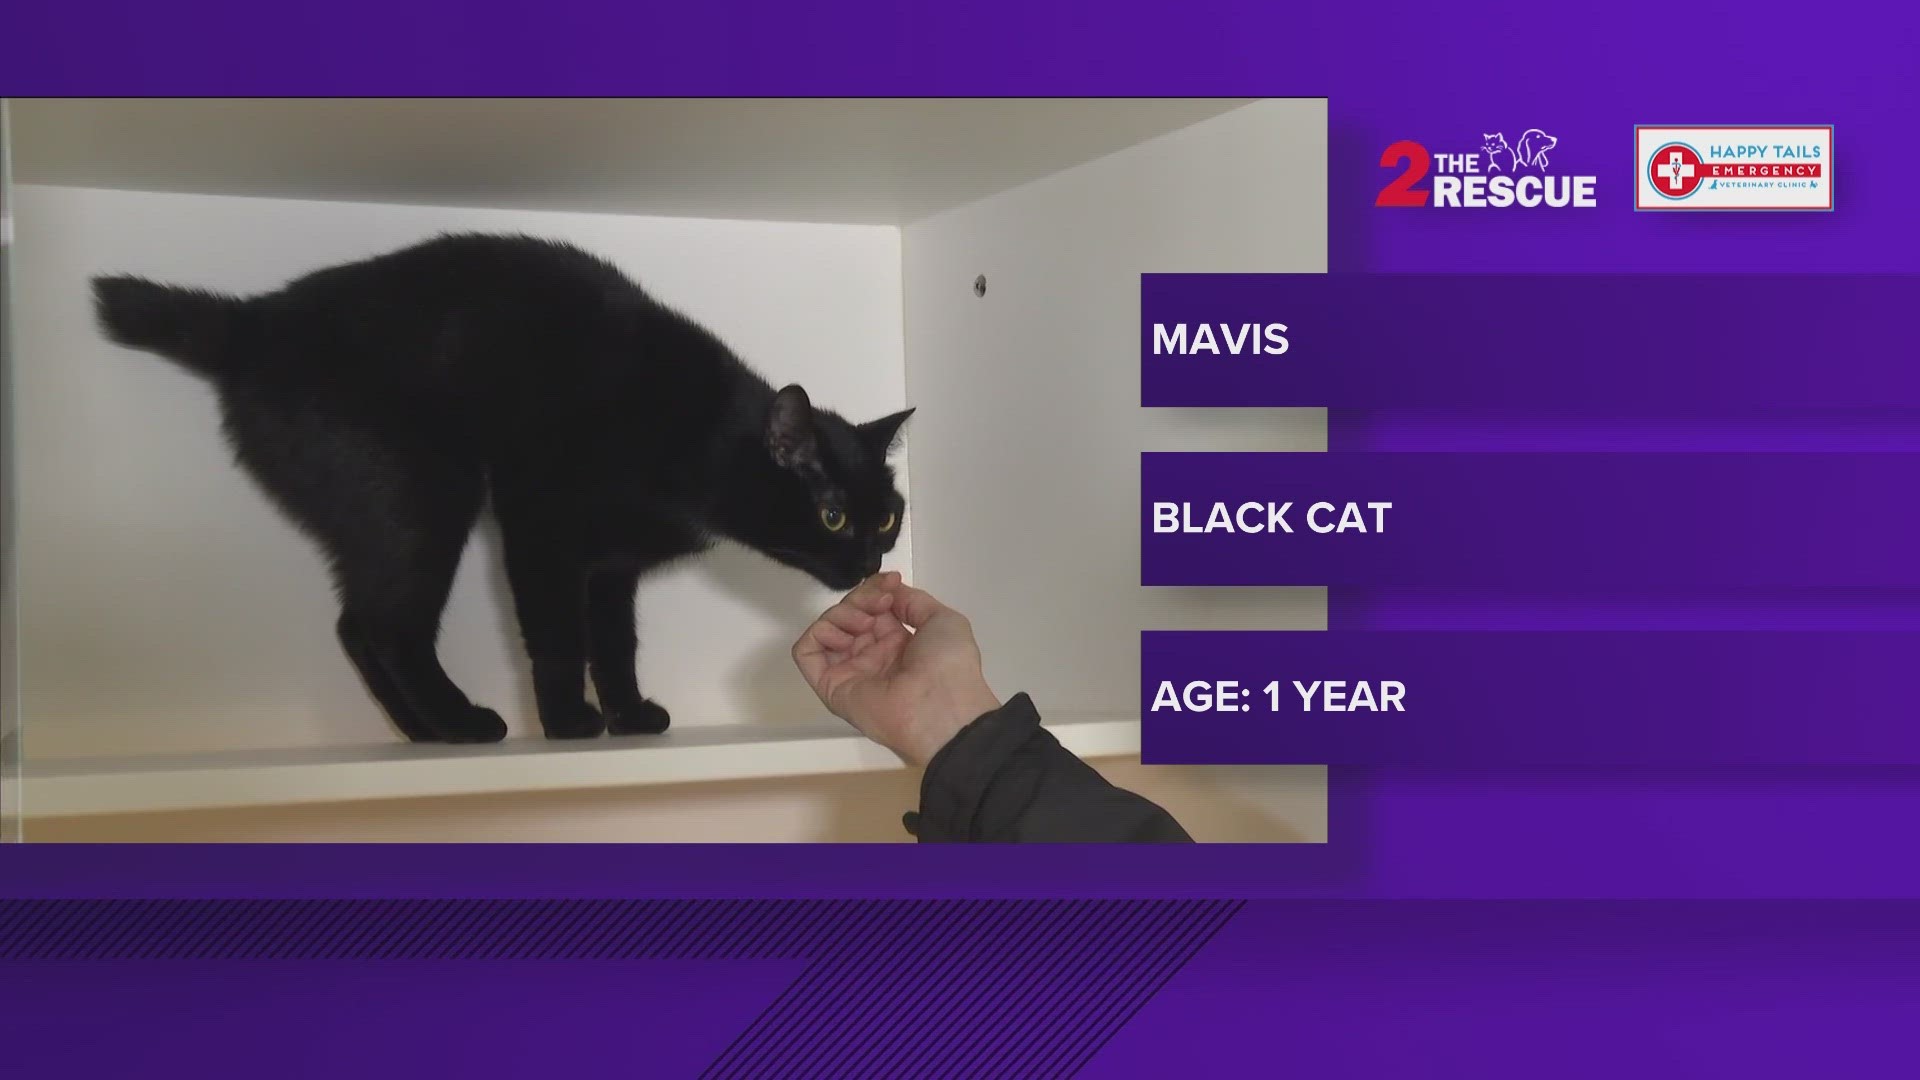 Mavis is a one-year-old black cat. She is a little timid at first but quickly warms up and loves to give the sweetest purrs.